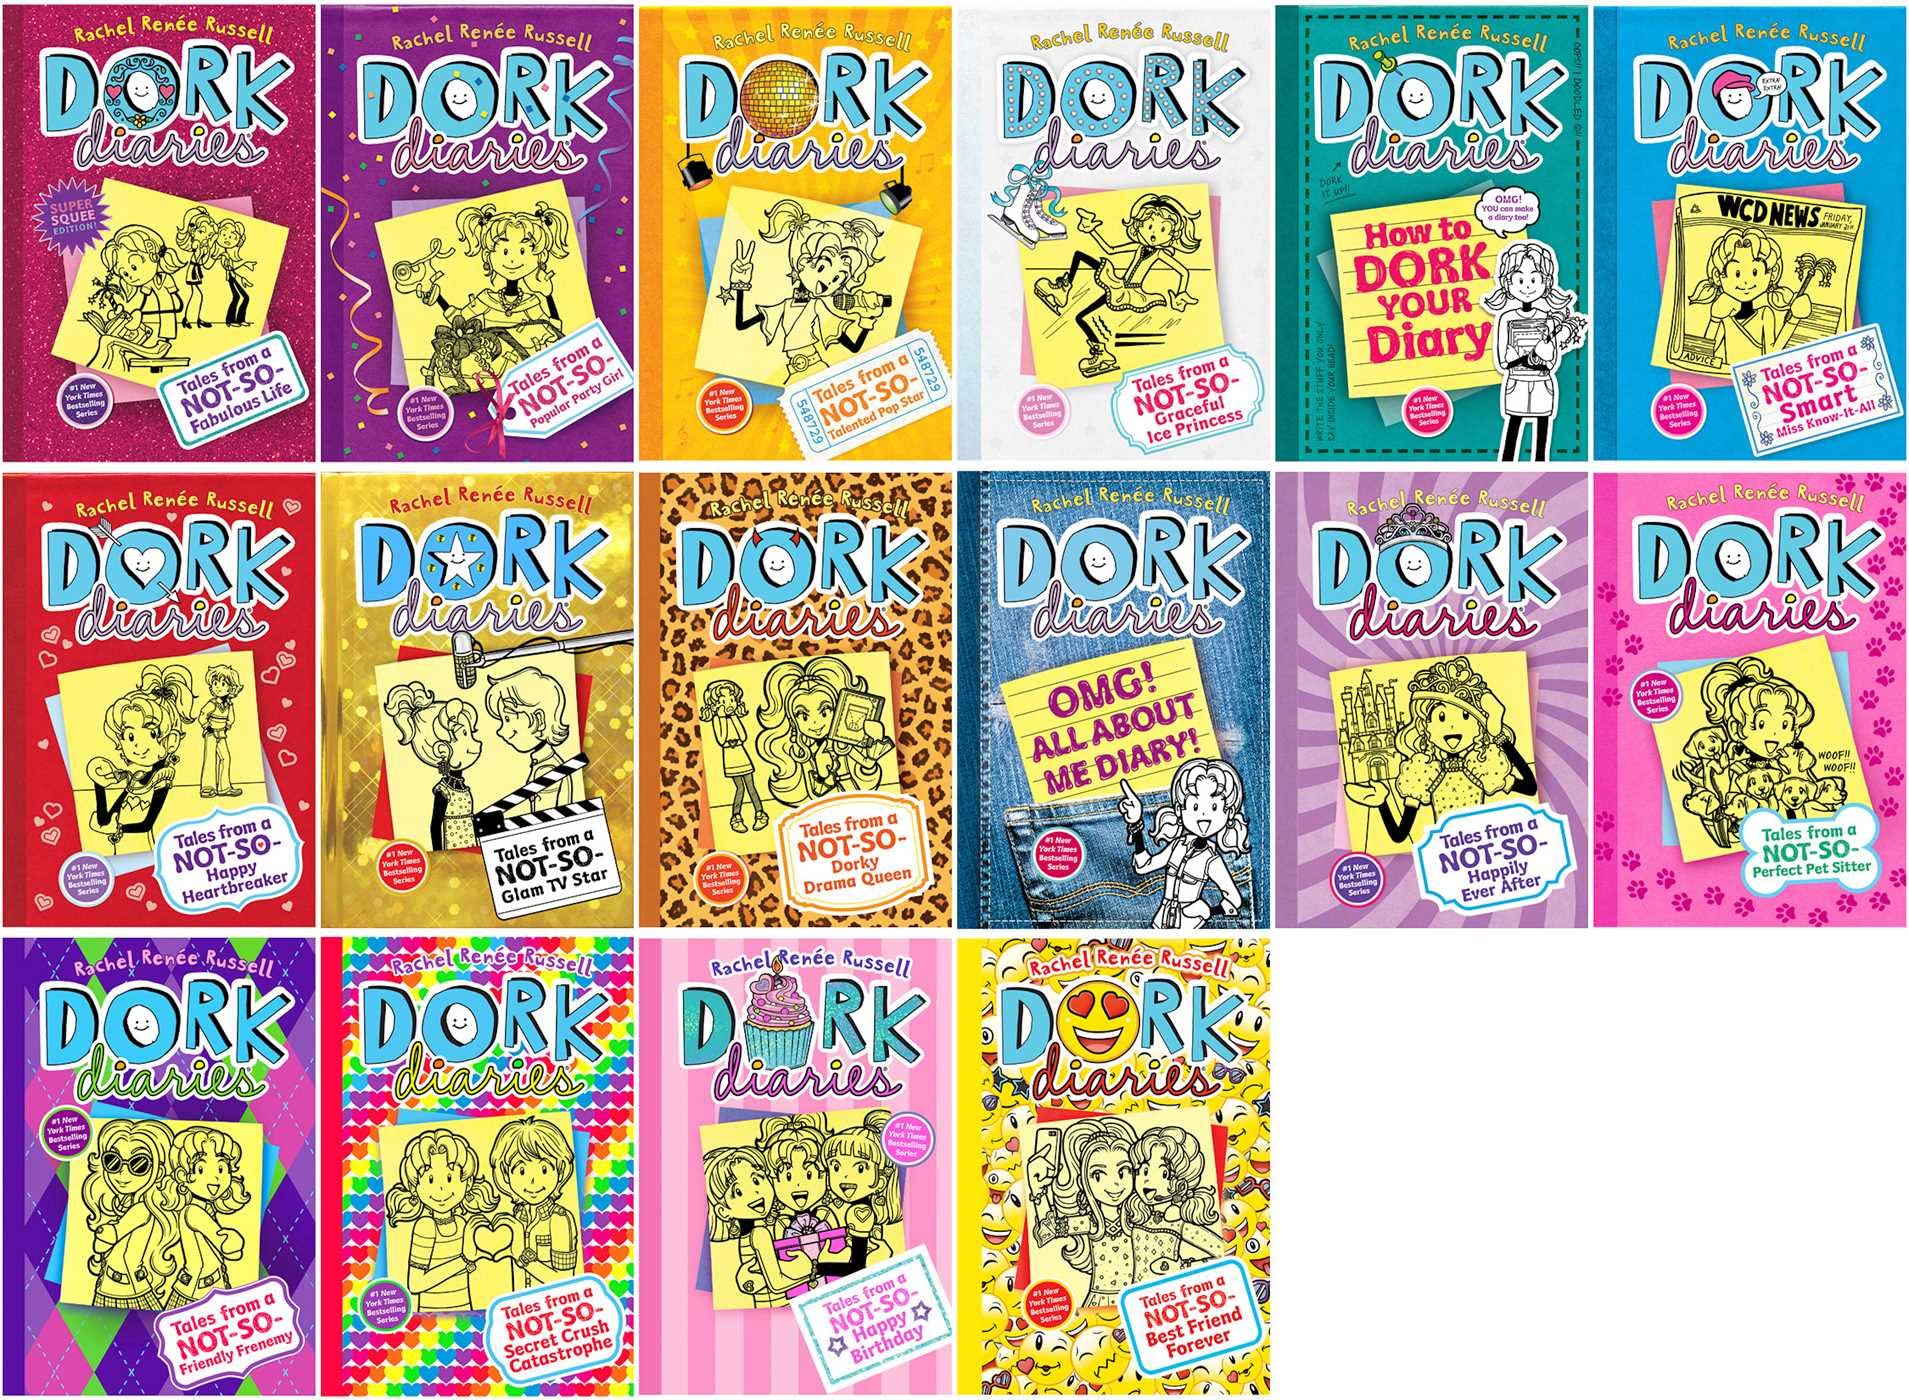 Dork Diaries 14: Tales from a Not-So-Best Friend Forever (14)